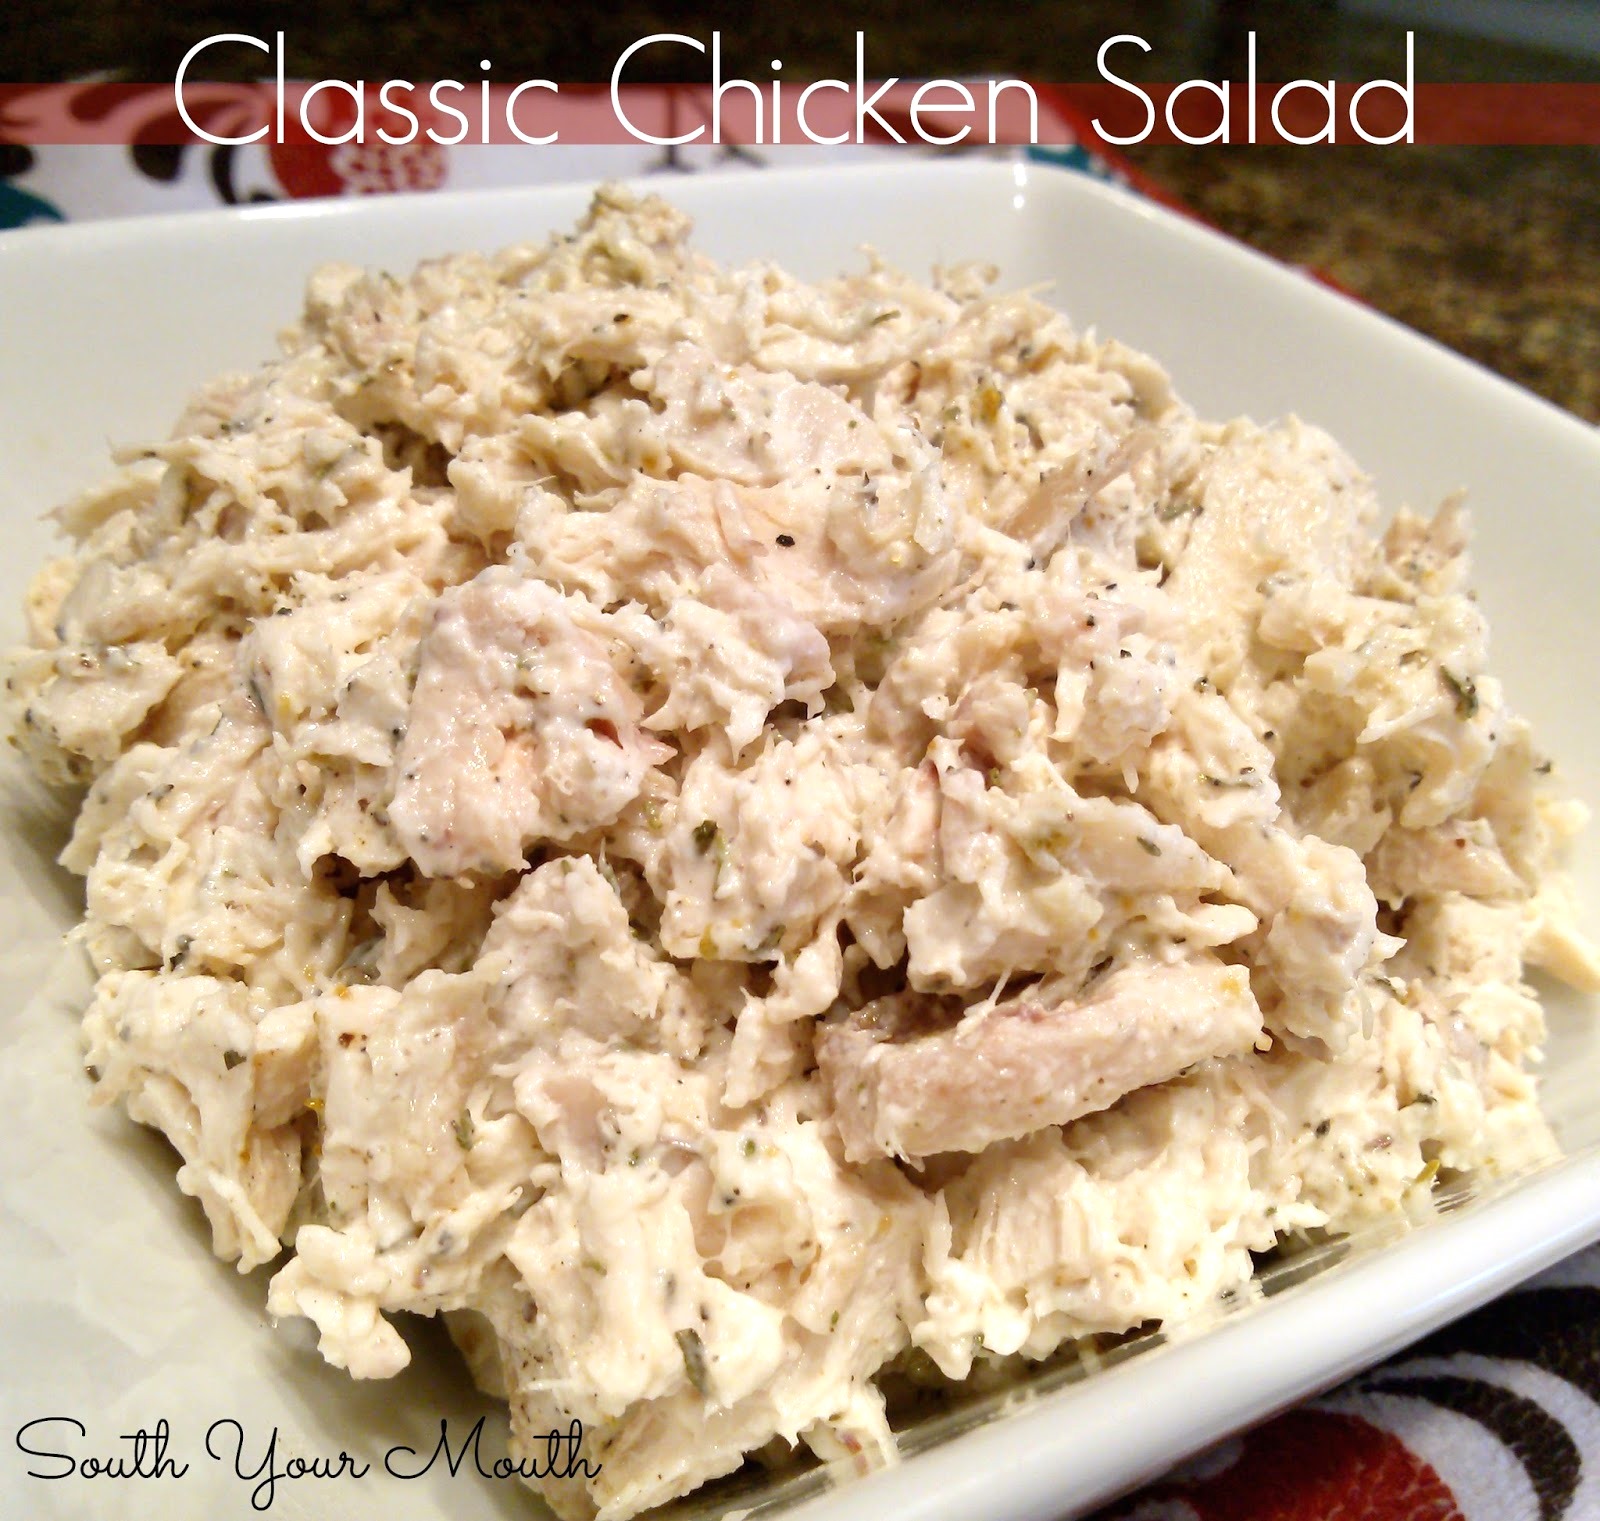 South Your Mouth: Classic Chicken Salad